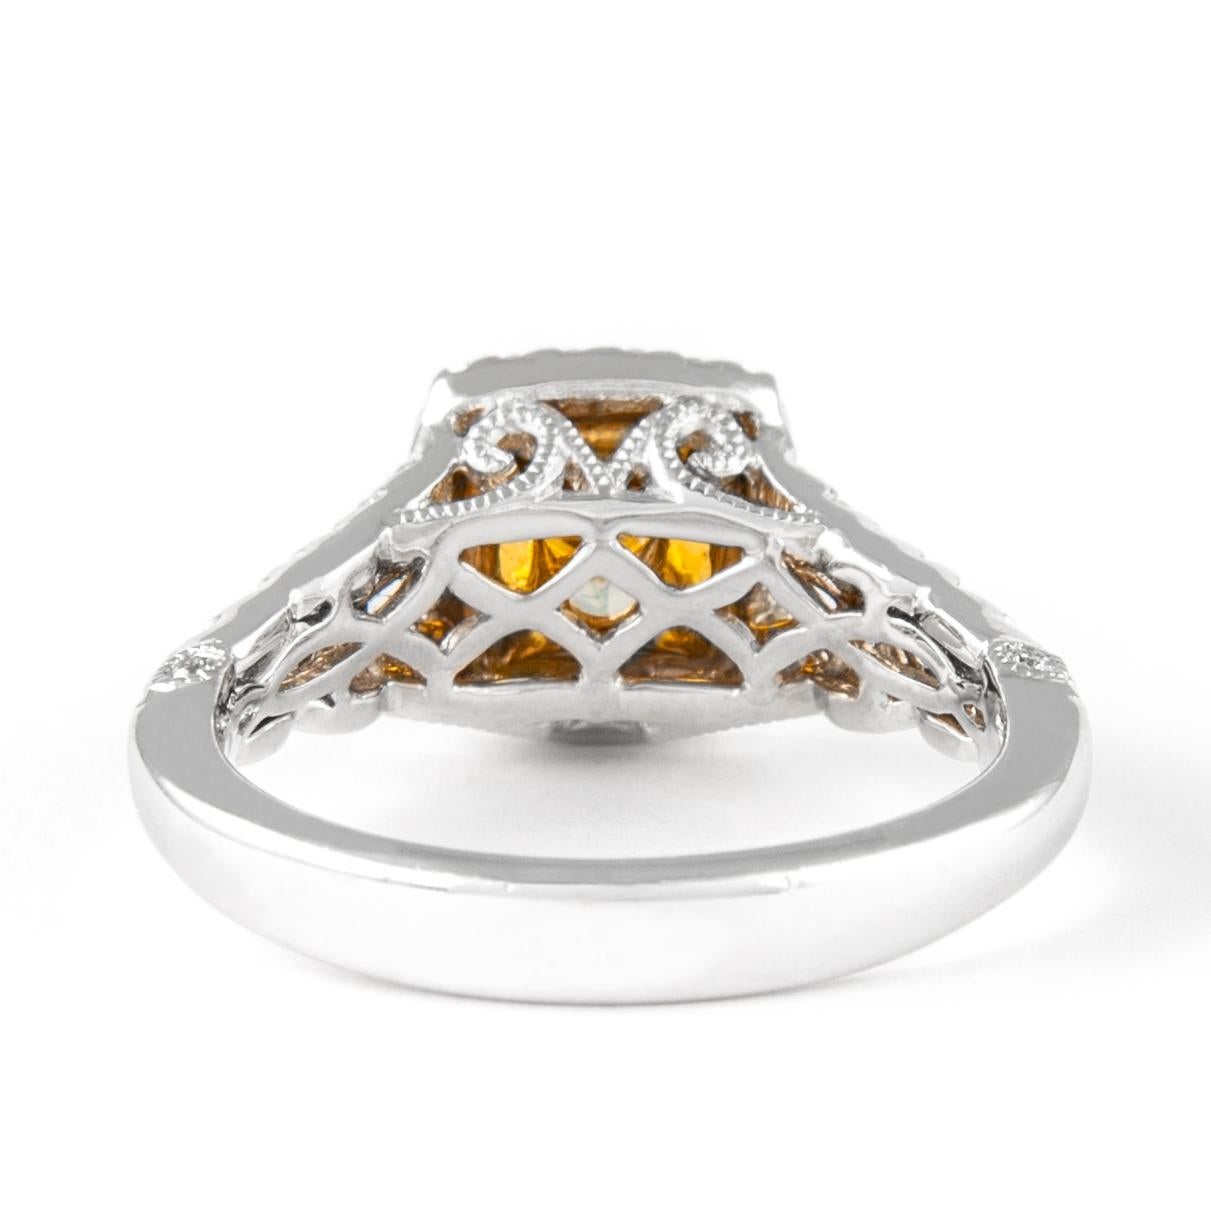 Alexander 1.76ctt Fancy Yellow VVS2 Cushion Diamond with Halo Ring 18k Two Tone In New Condition For Sale In BEVERLY HILLS, CA